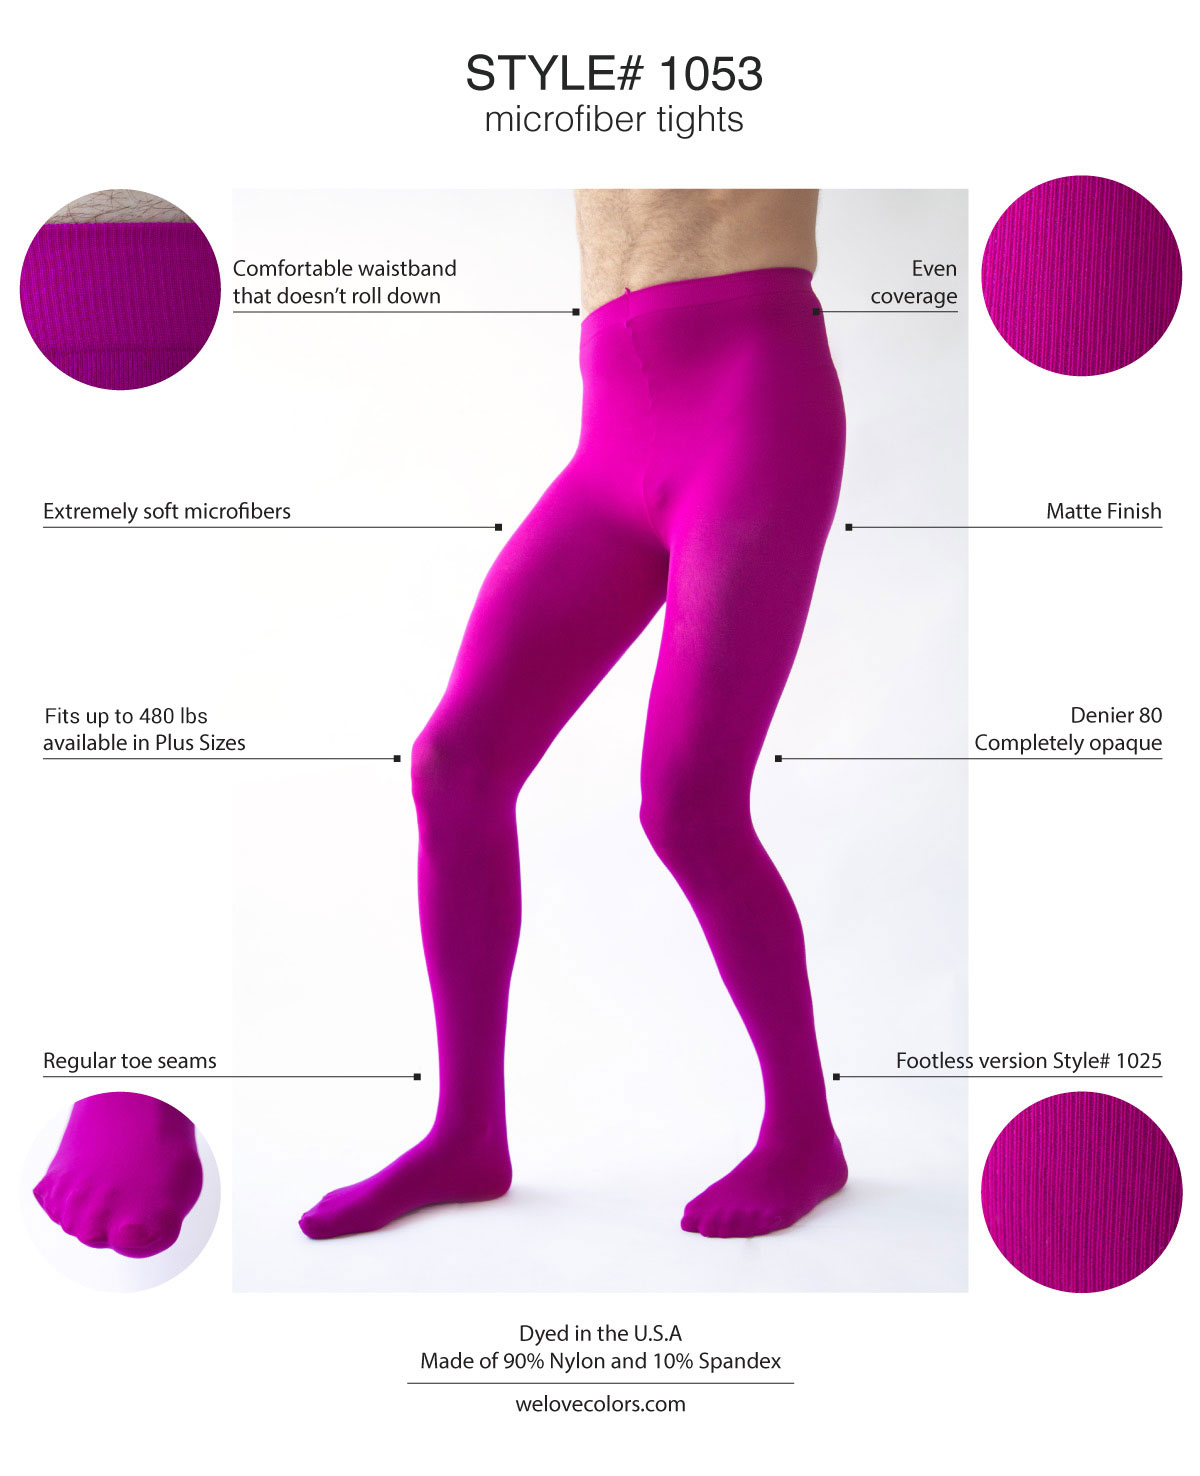 Coloured tights from welovecolours - Fashionmylegs : The tights and hosiery  blog